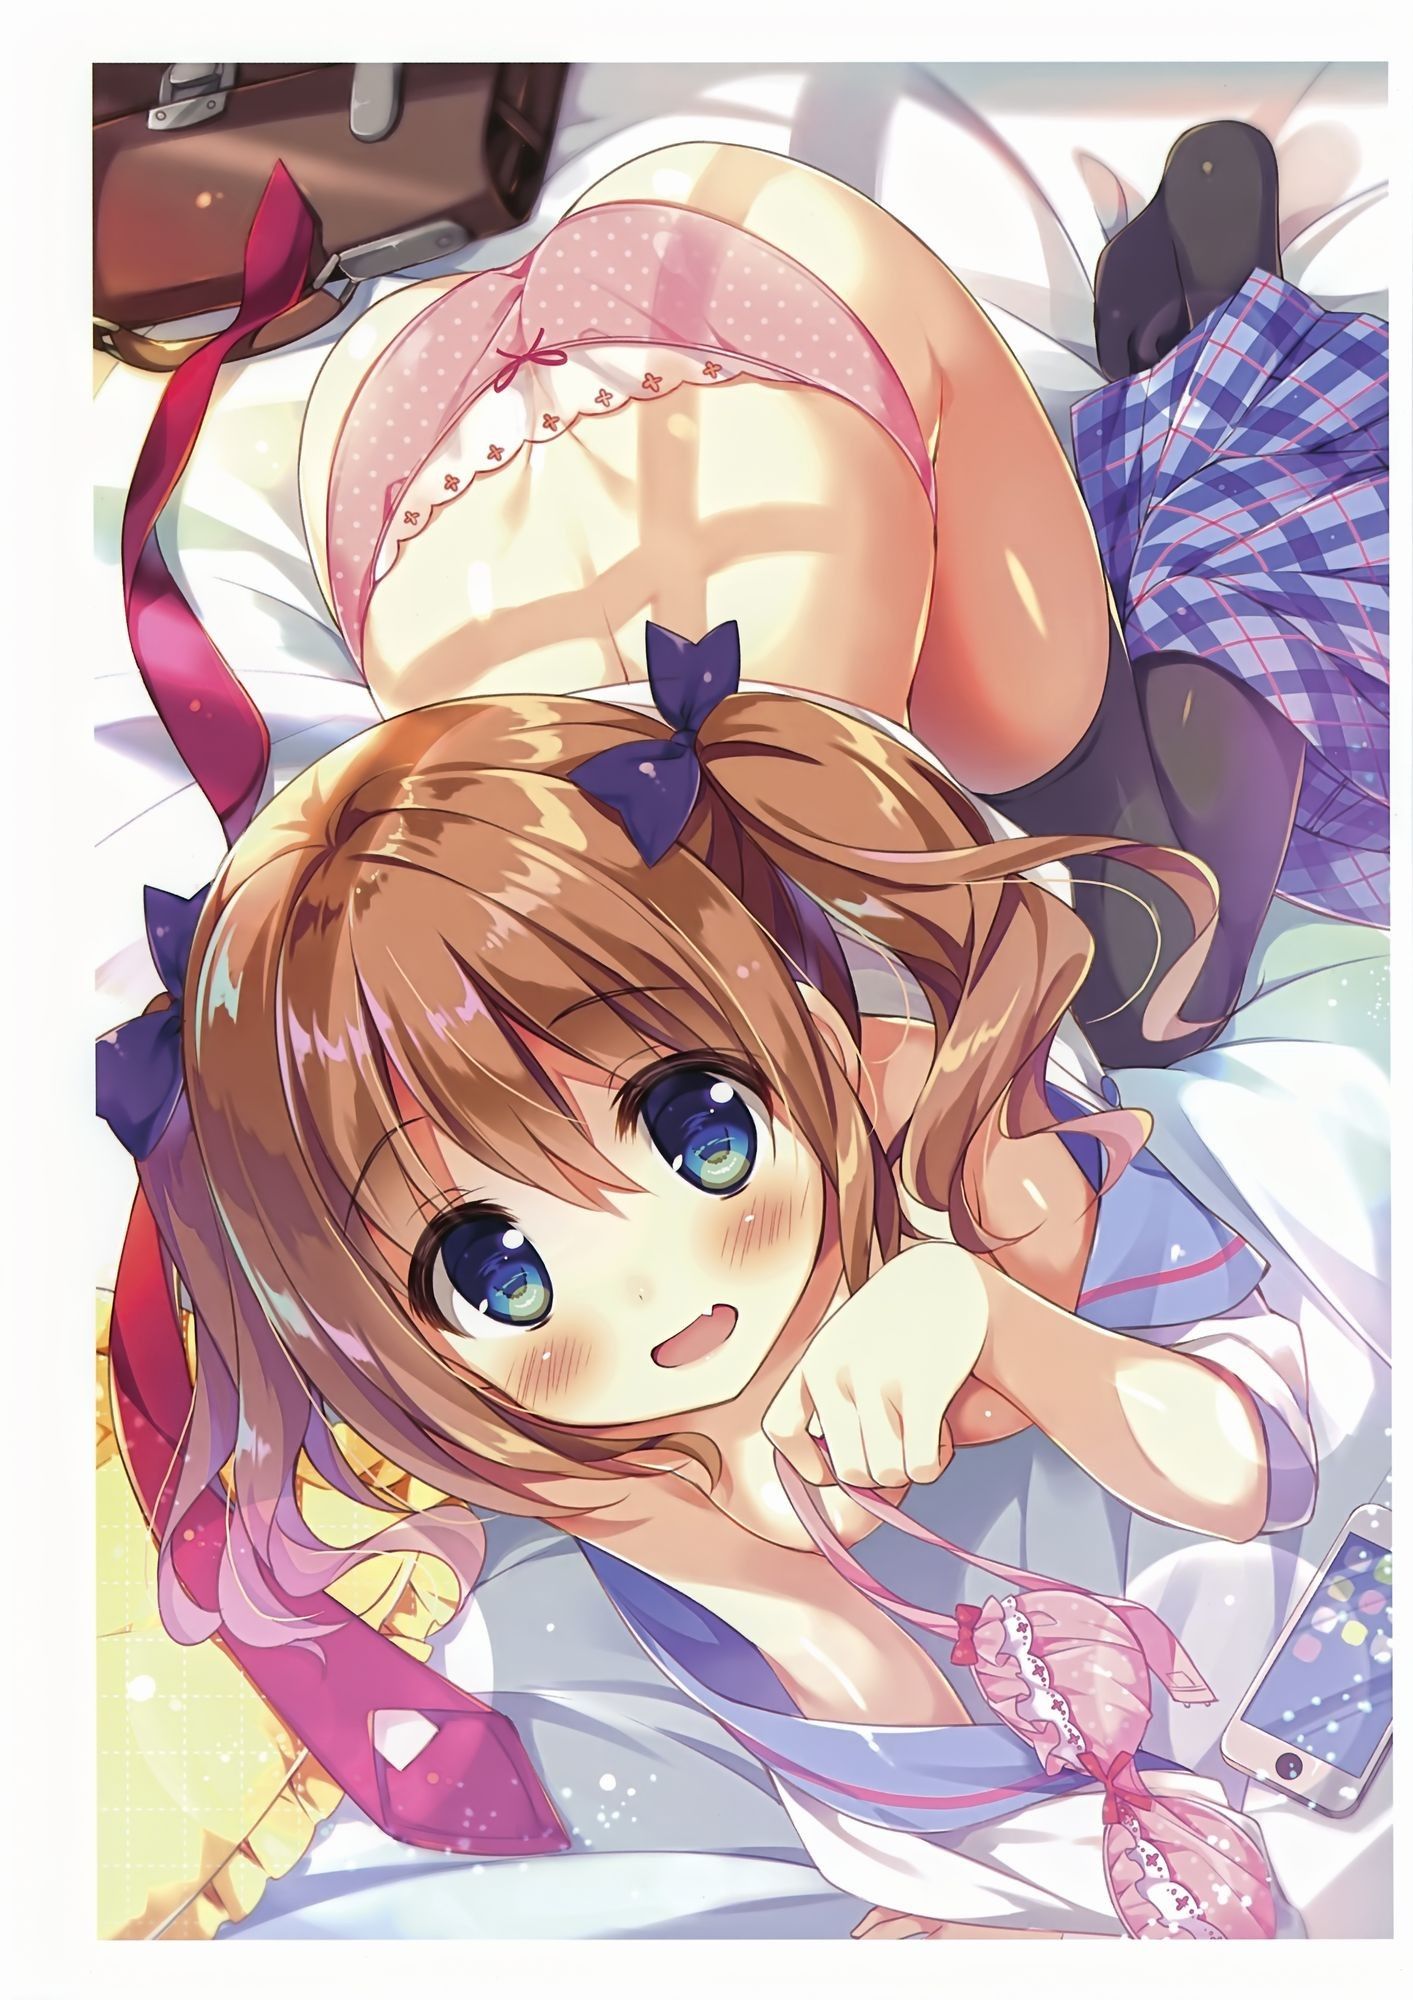 Secondary erotic erotic image of the body of the girl of twin tail is here 28